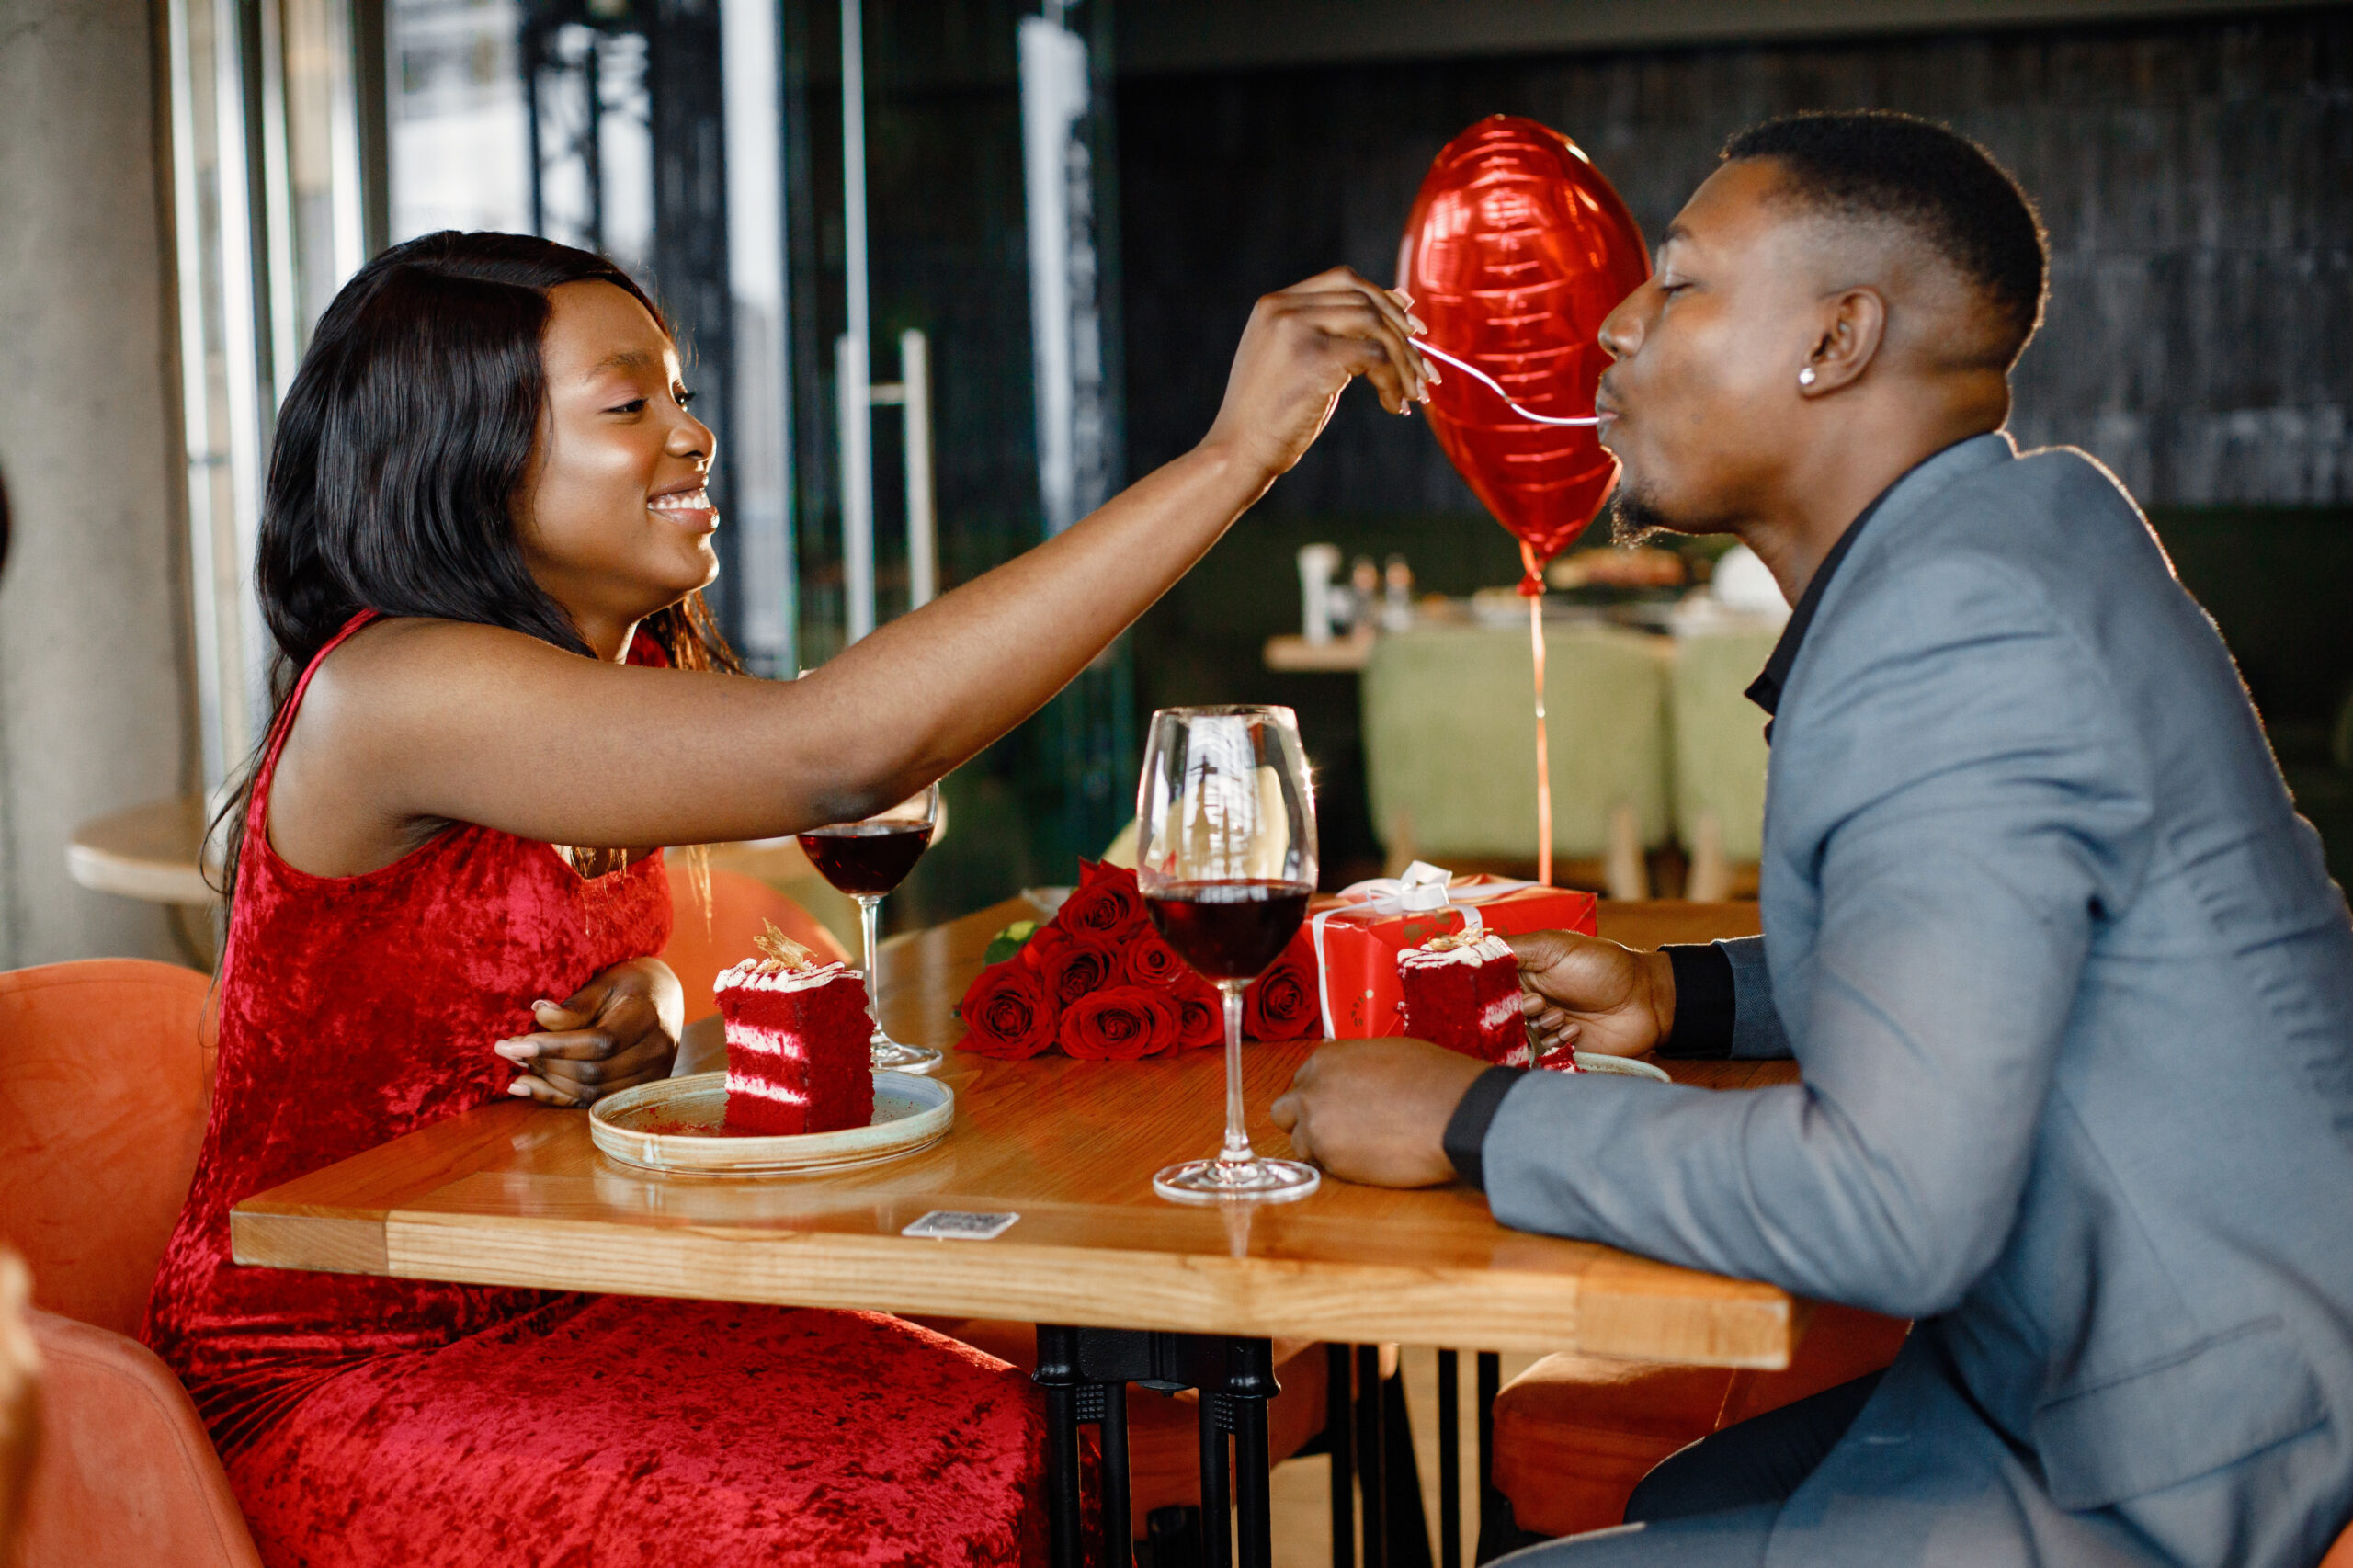 Couple enjoying day out at restaurant. Black man and woman drinking red wine and eating cakes. Woman wearing red elegant dress and man blue costume.